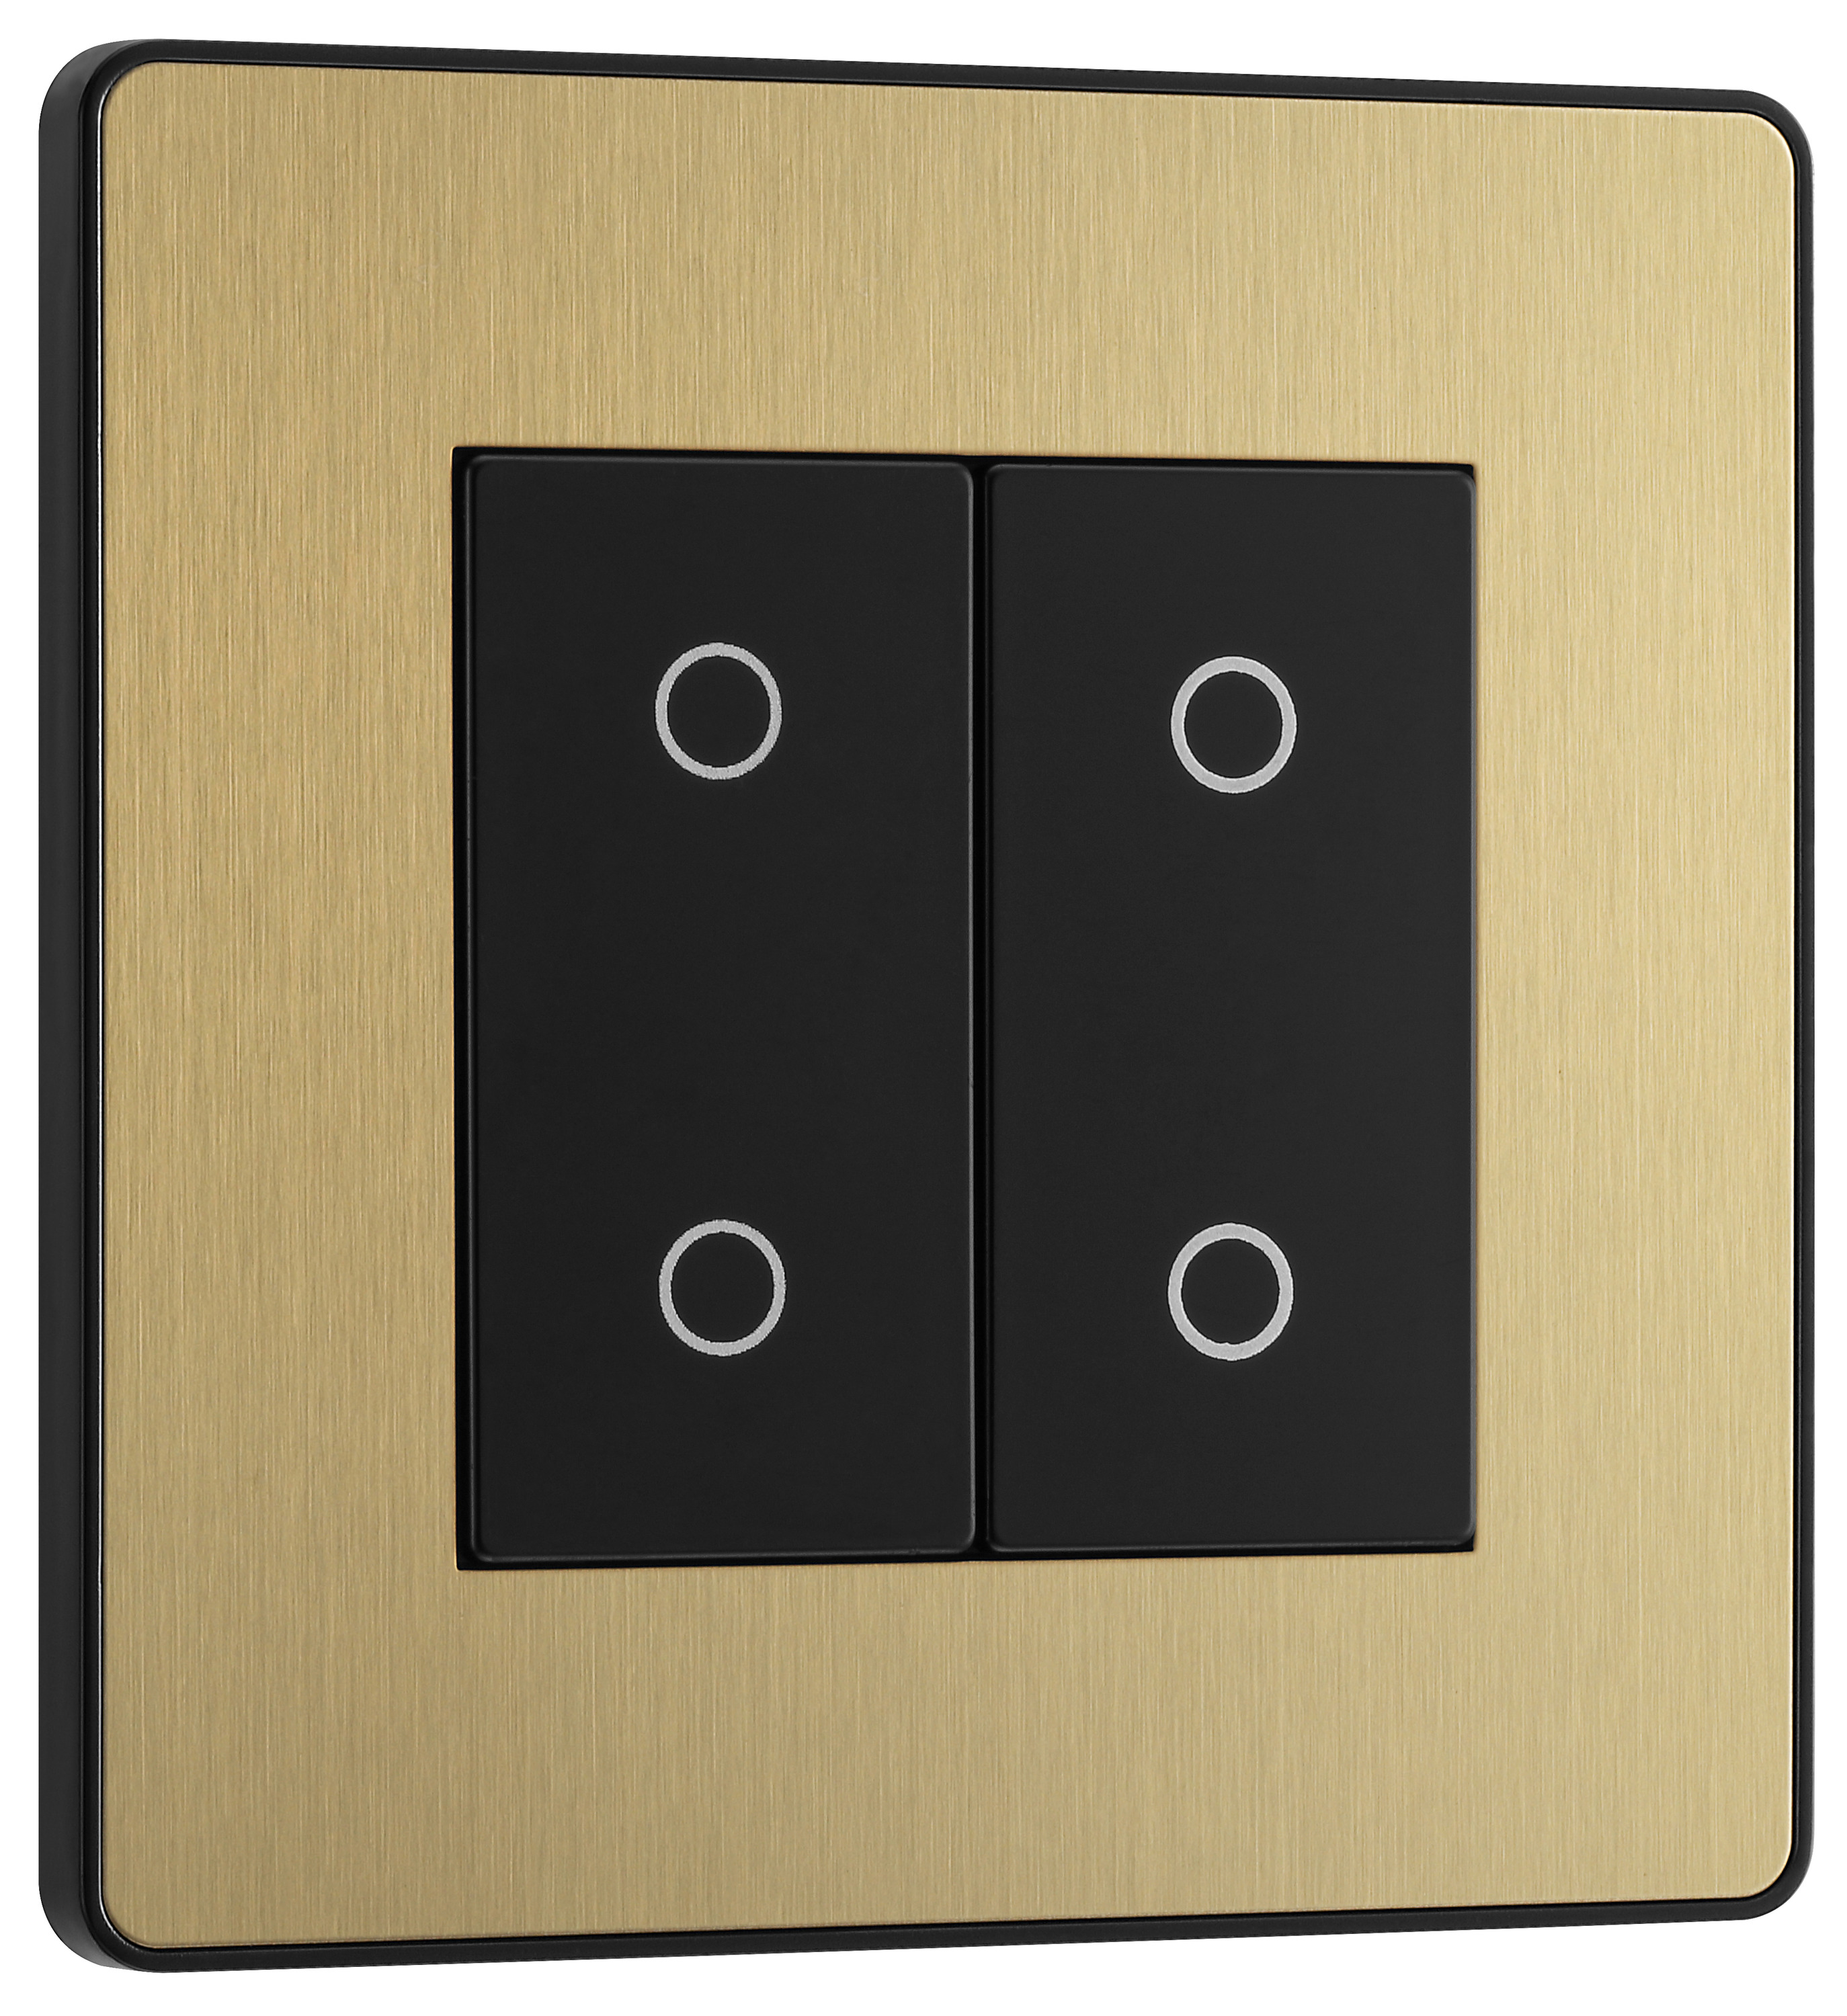 Image of BG Evolve Master Brushed Brass 2 Way Double Touch Dimmer Switch - 200W